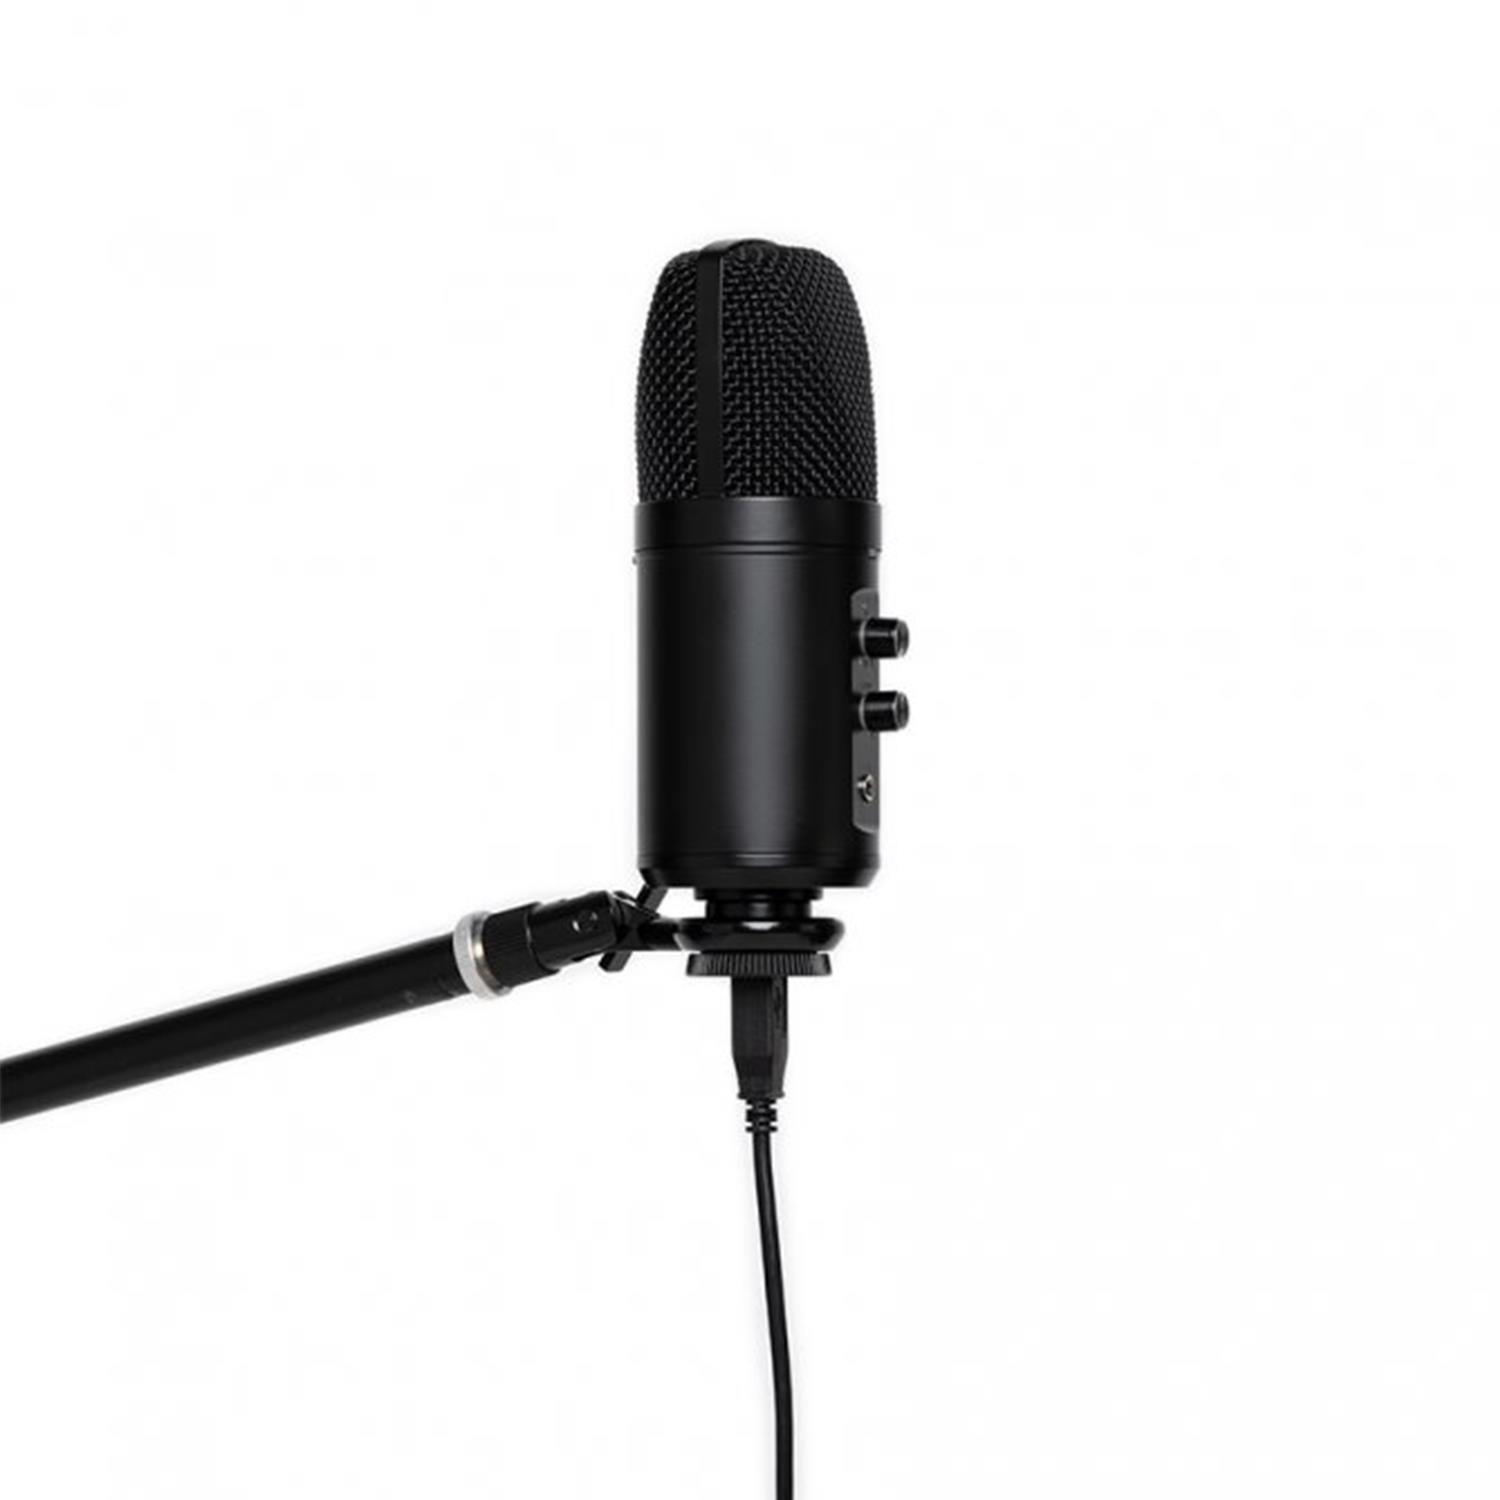 Stagg SUSM60D USB Double Condenser Microphone - DY Pro Audio